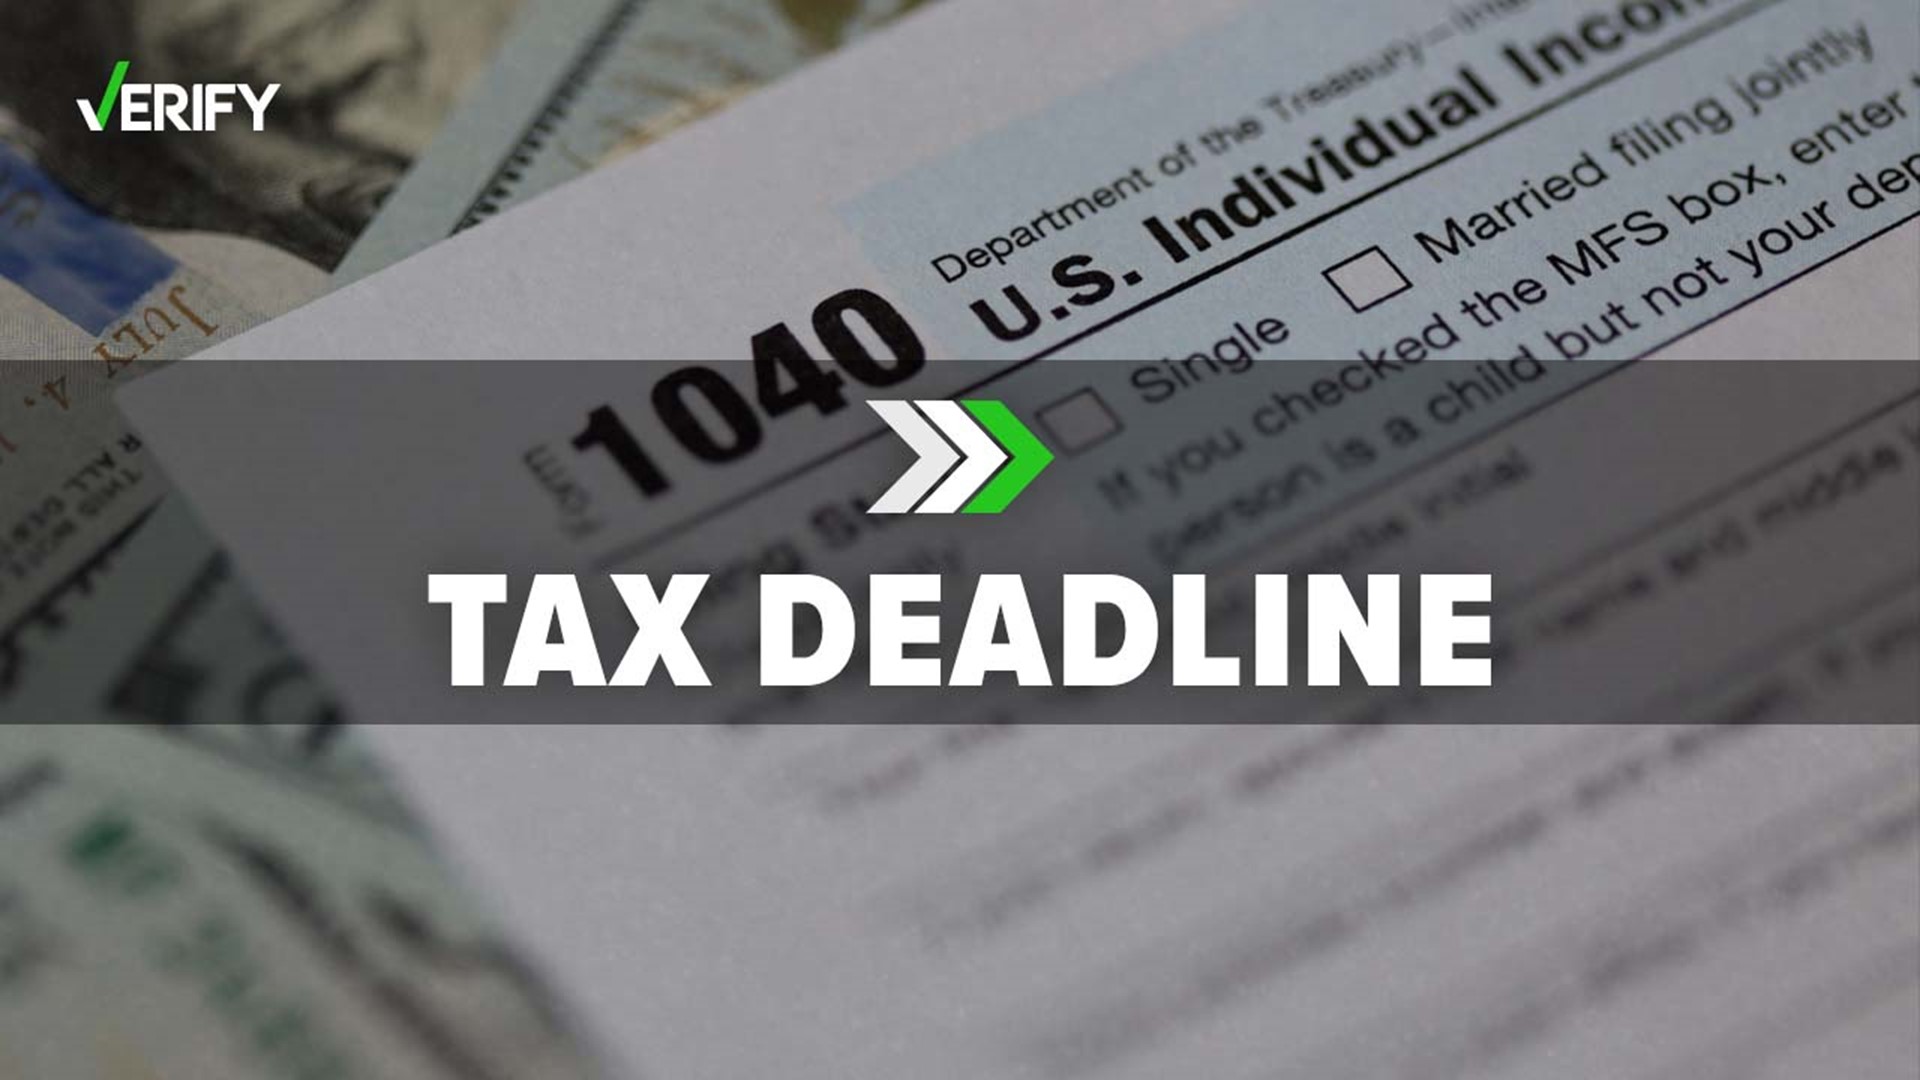 For the past two years, the IRS has pushed the tax filing deadline past April. The agency hasn’t done the same this year.